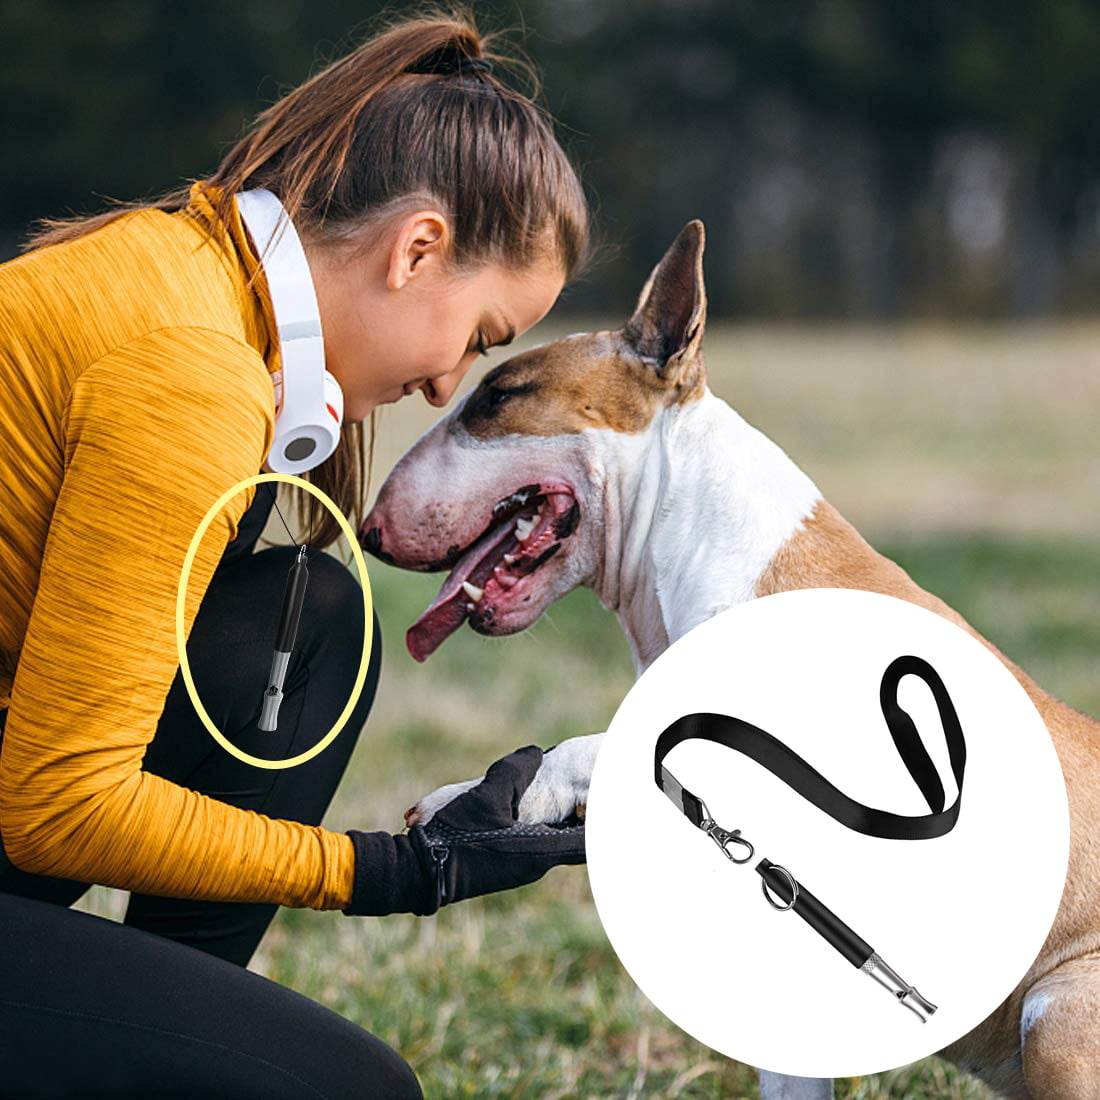 YAODHAOD Dog Whistle Stainless Steel Dog Whistle Adjustable Frequency Ultrasonic Training Tool and Premium Quality Lanyard Professional Dog Training Whistle to Stop Barking 